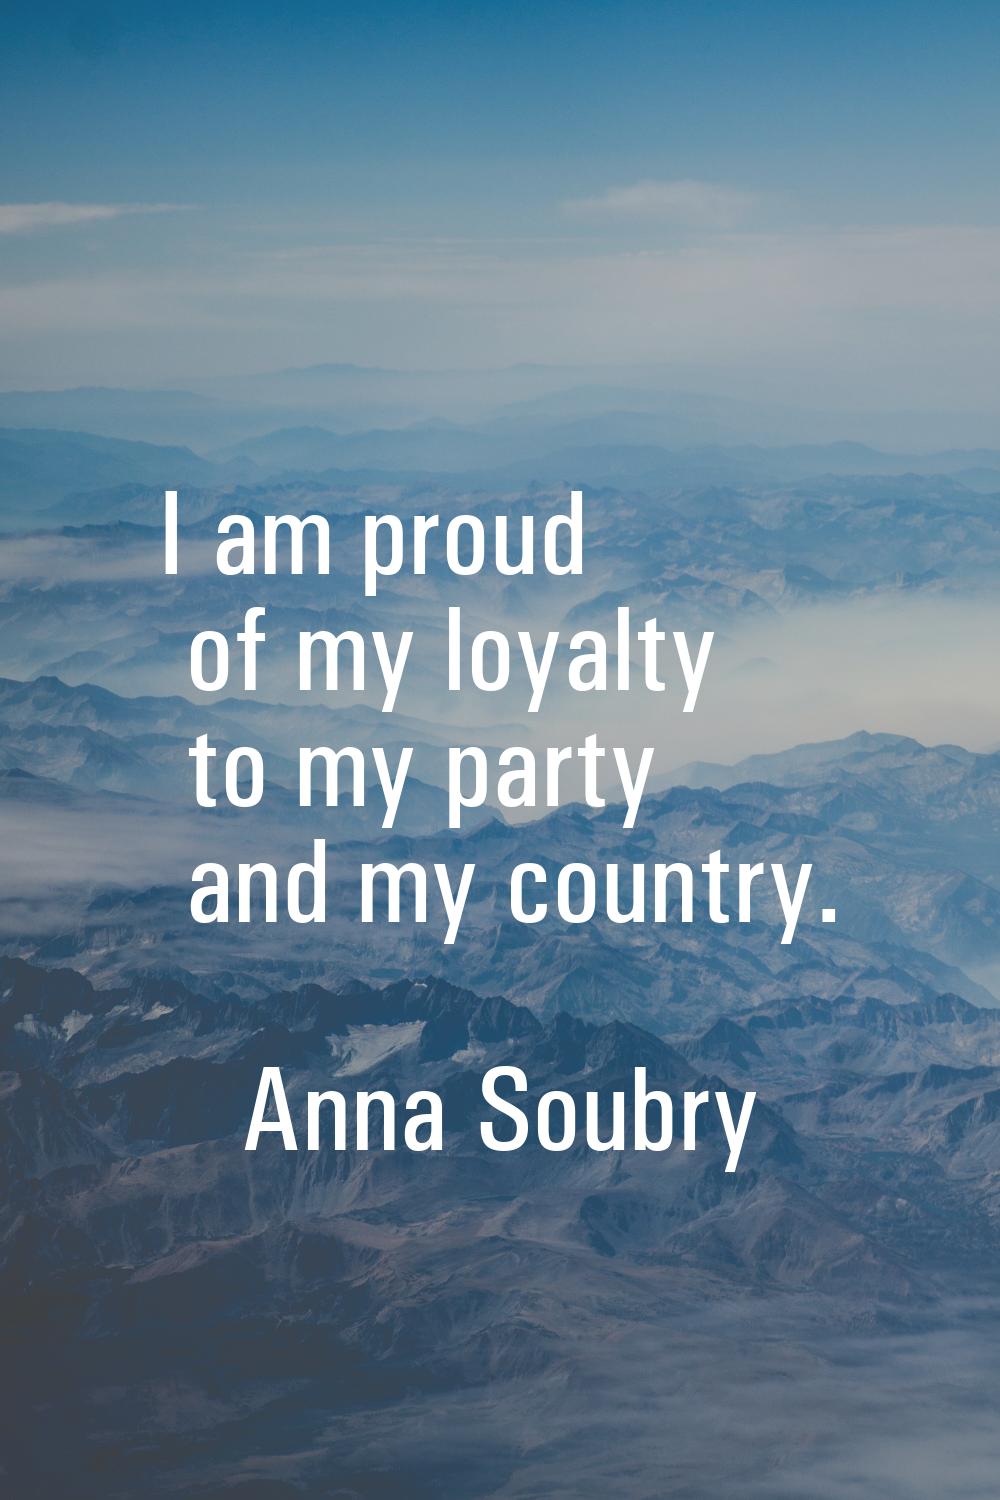 I am proud of my loyalty to my party and my country.